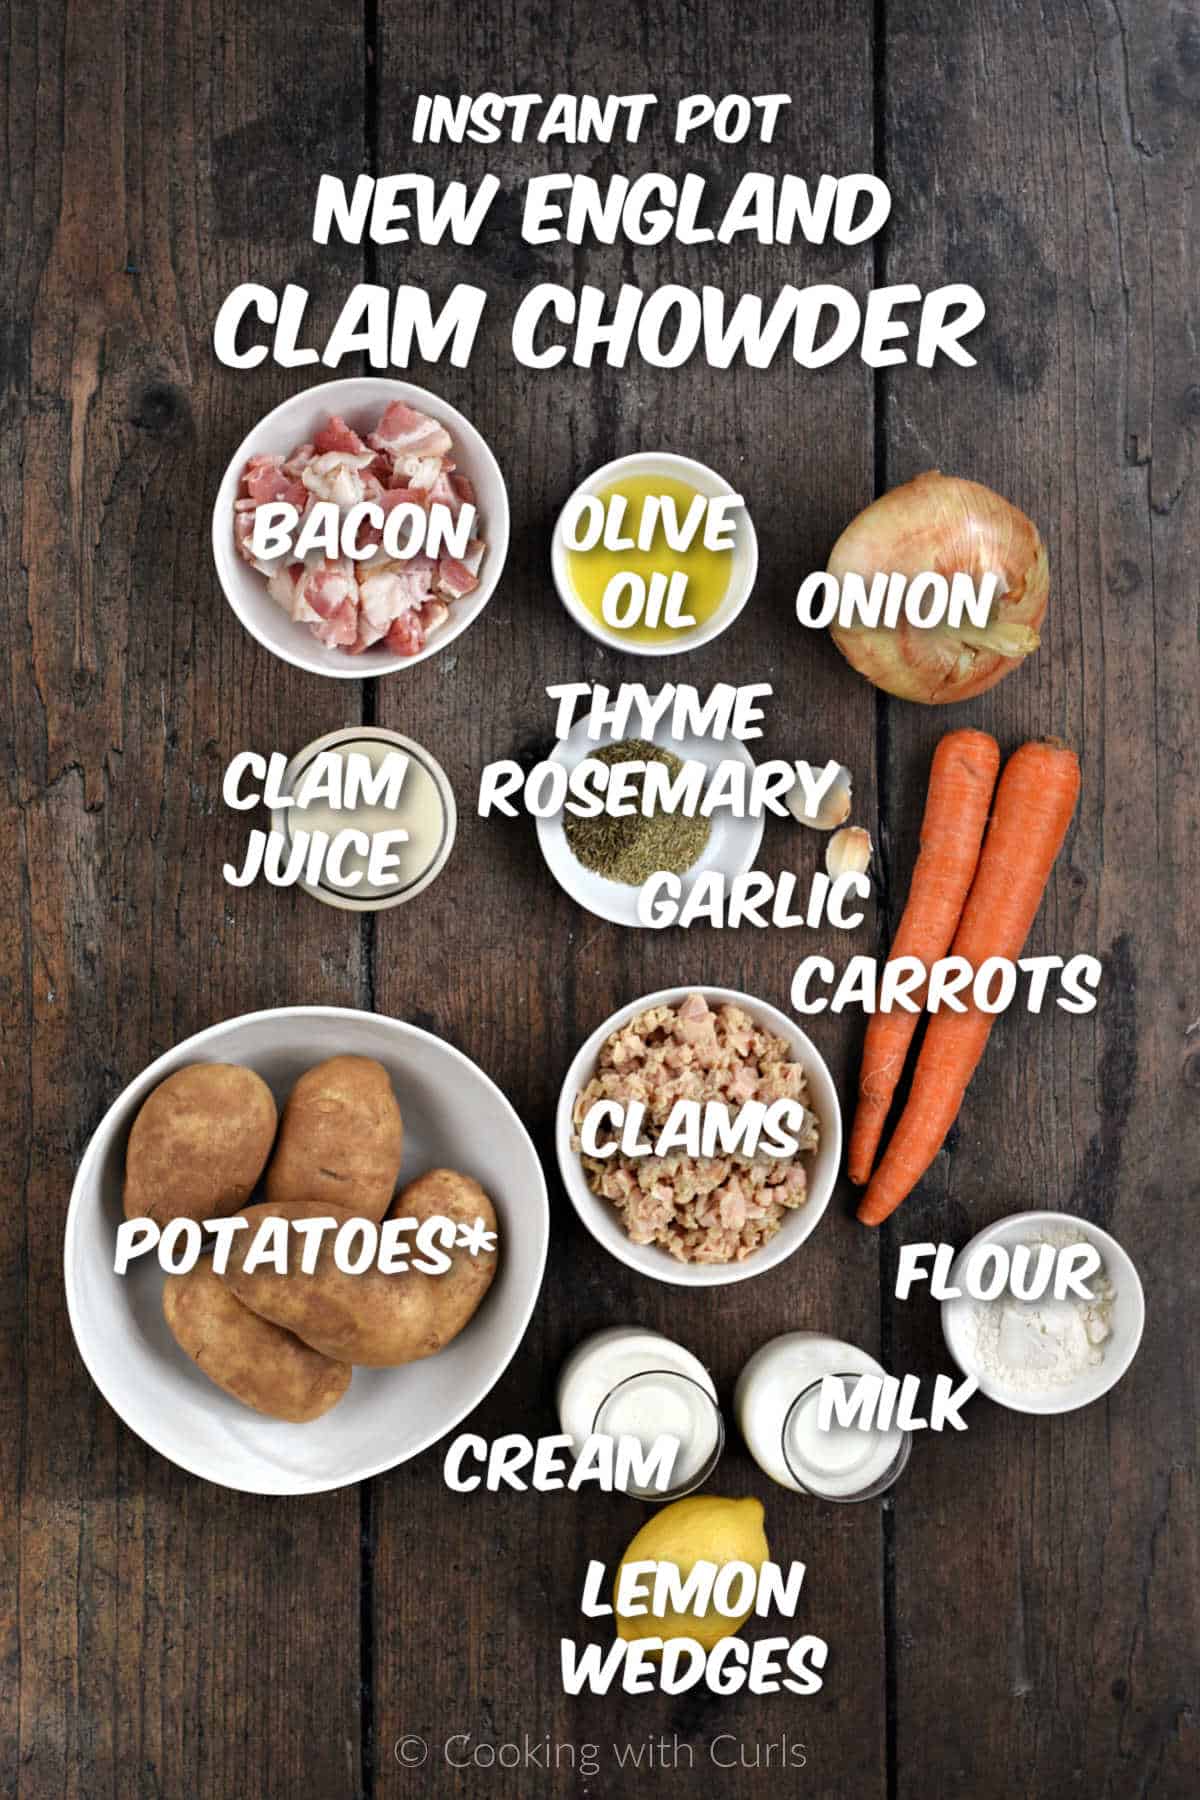 Ingredients to make Instant Pot New England Clam Chowder.